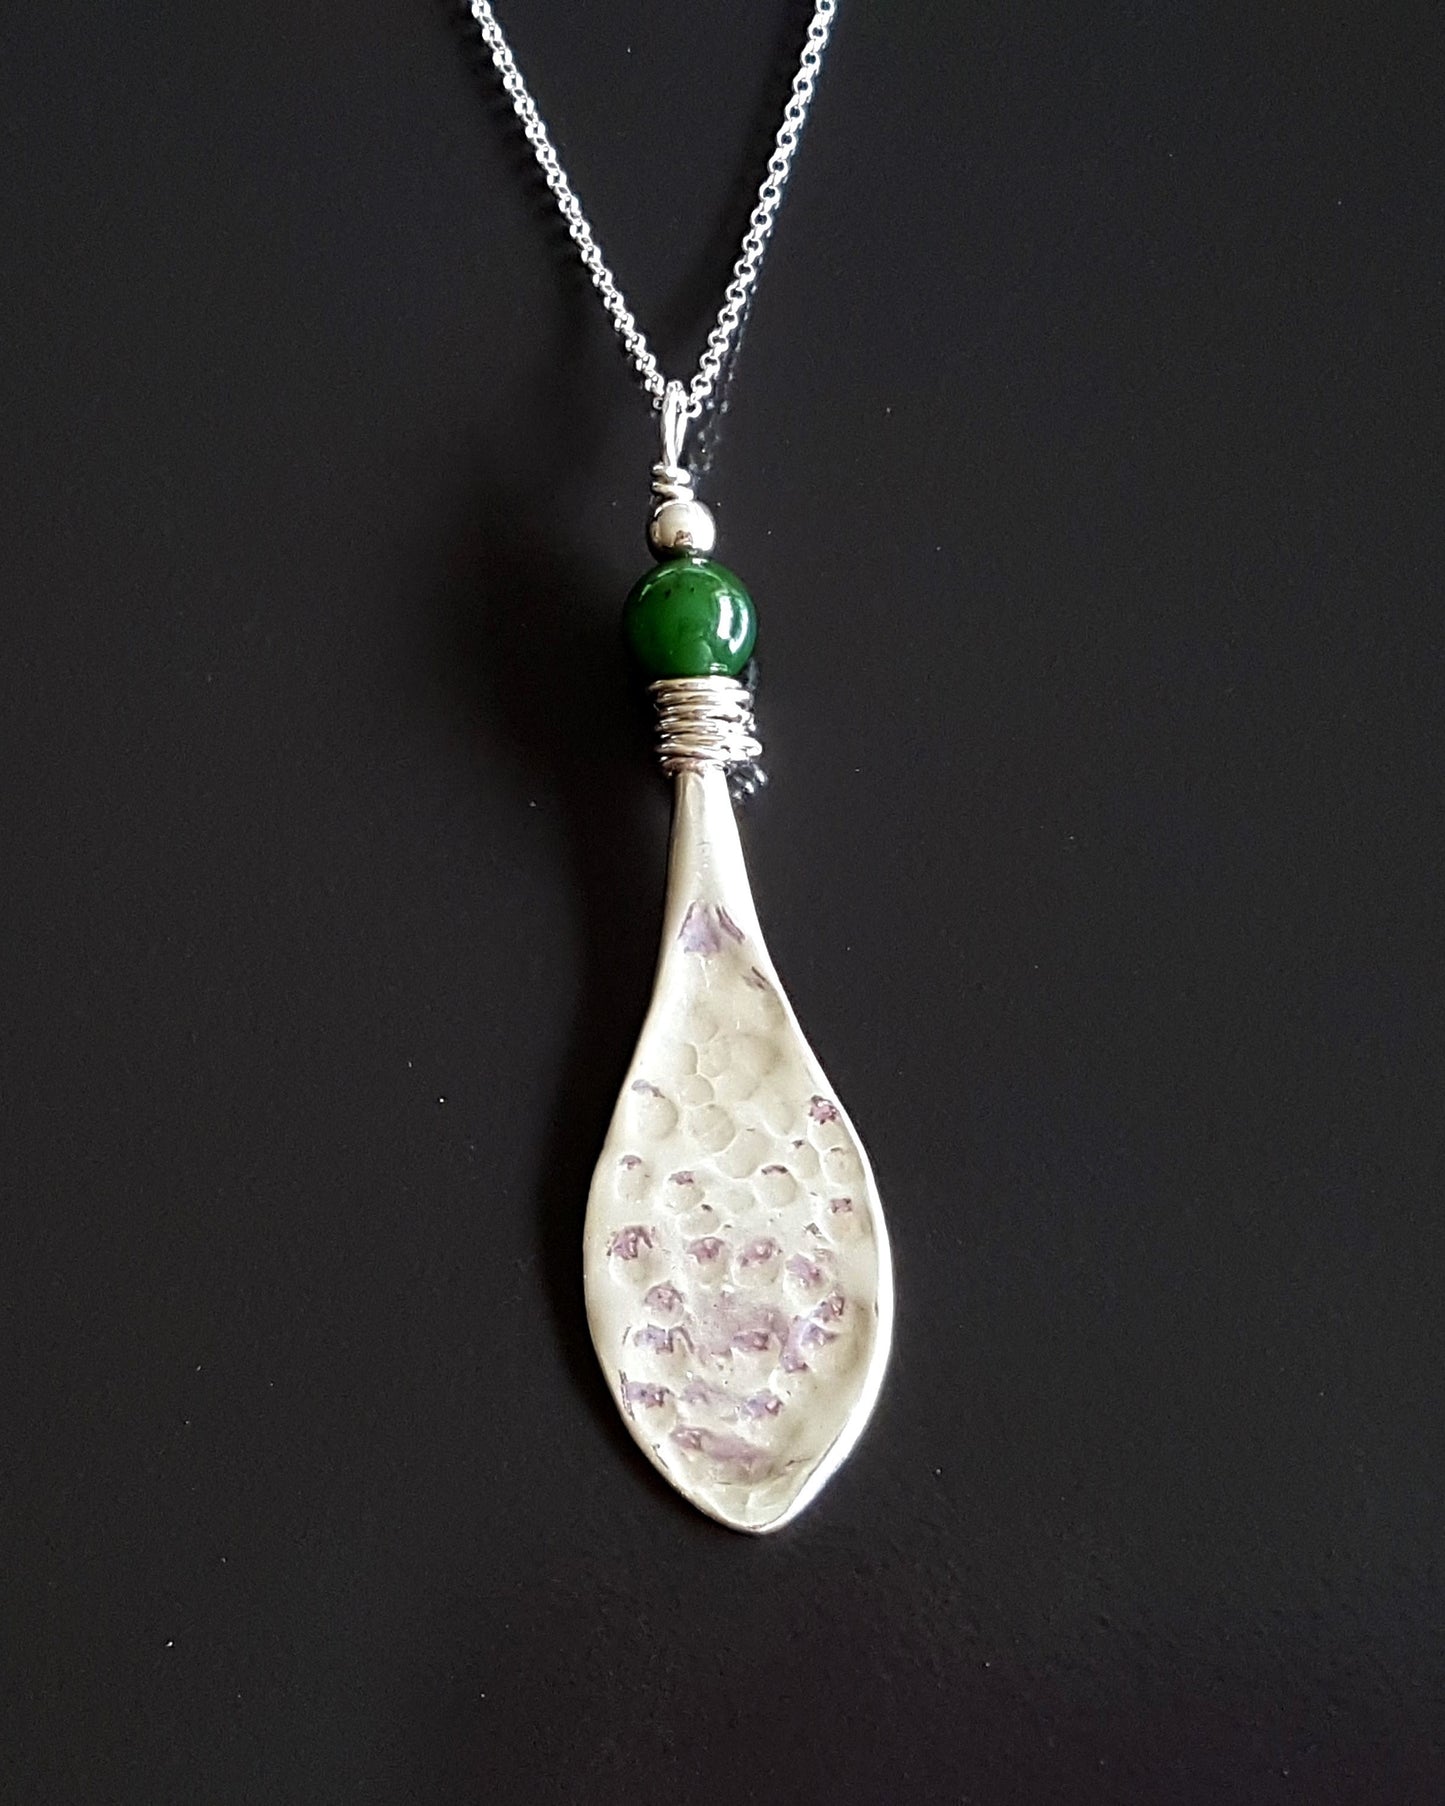 Vintage Jade River Paddle Pendant, Sterling Silver pendant with green Jade Stone